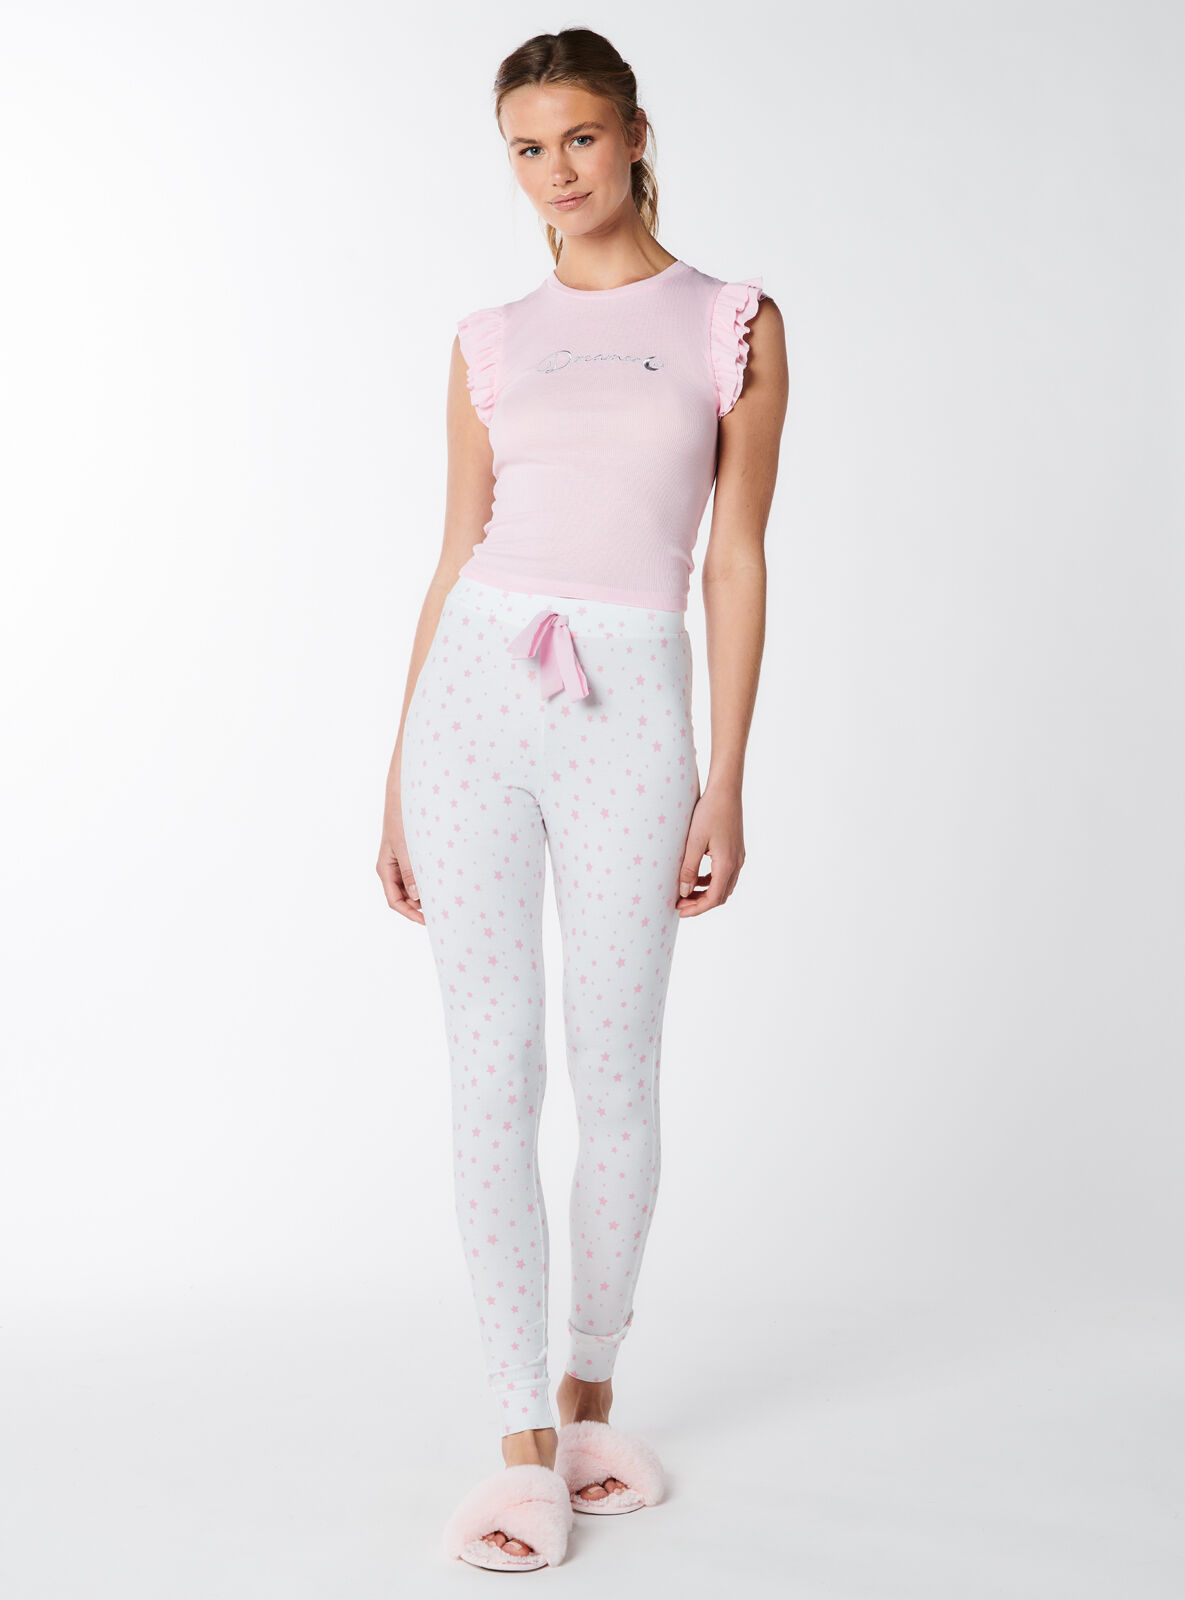 Boux Avenue Dreamer frill tee and leggings set - Pink Mix - 10